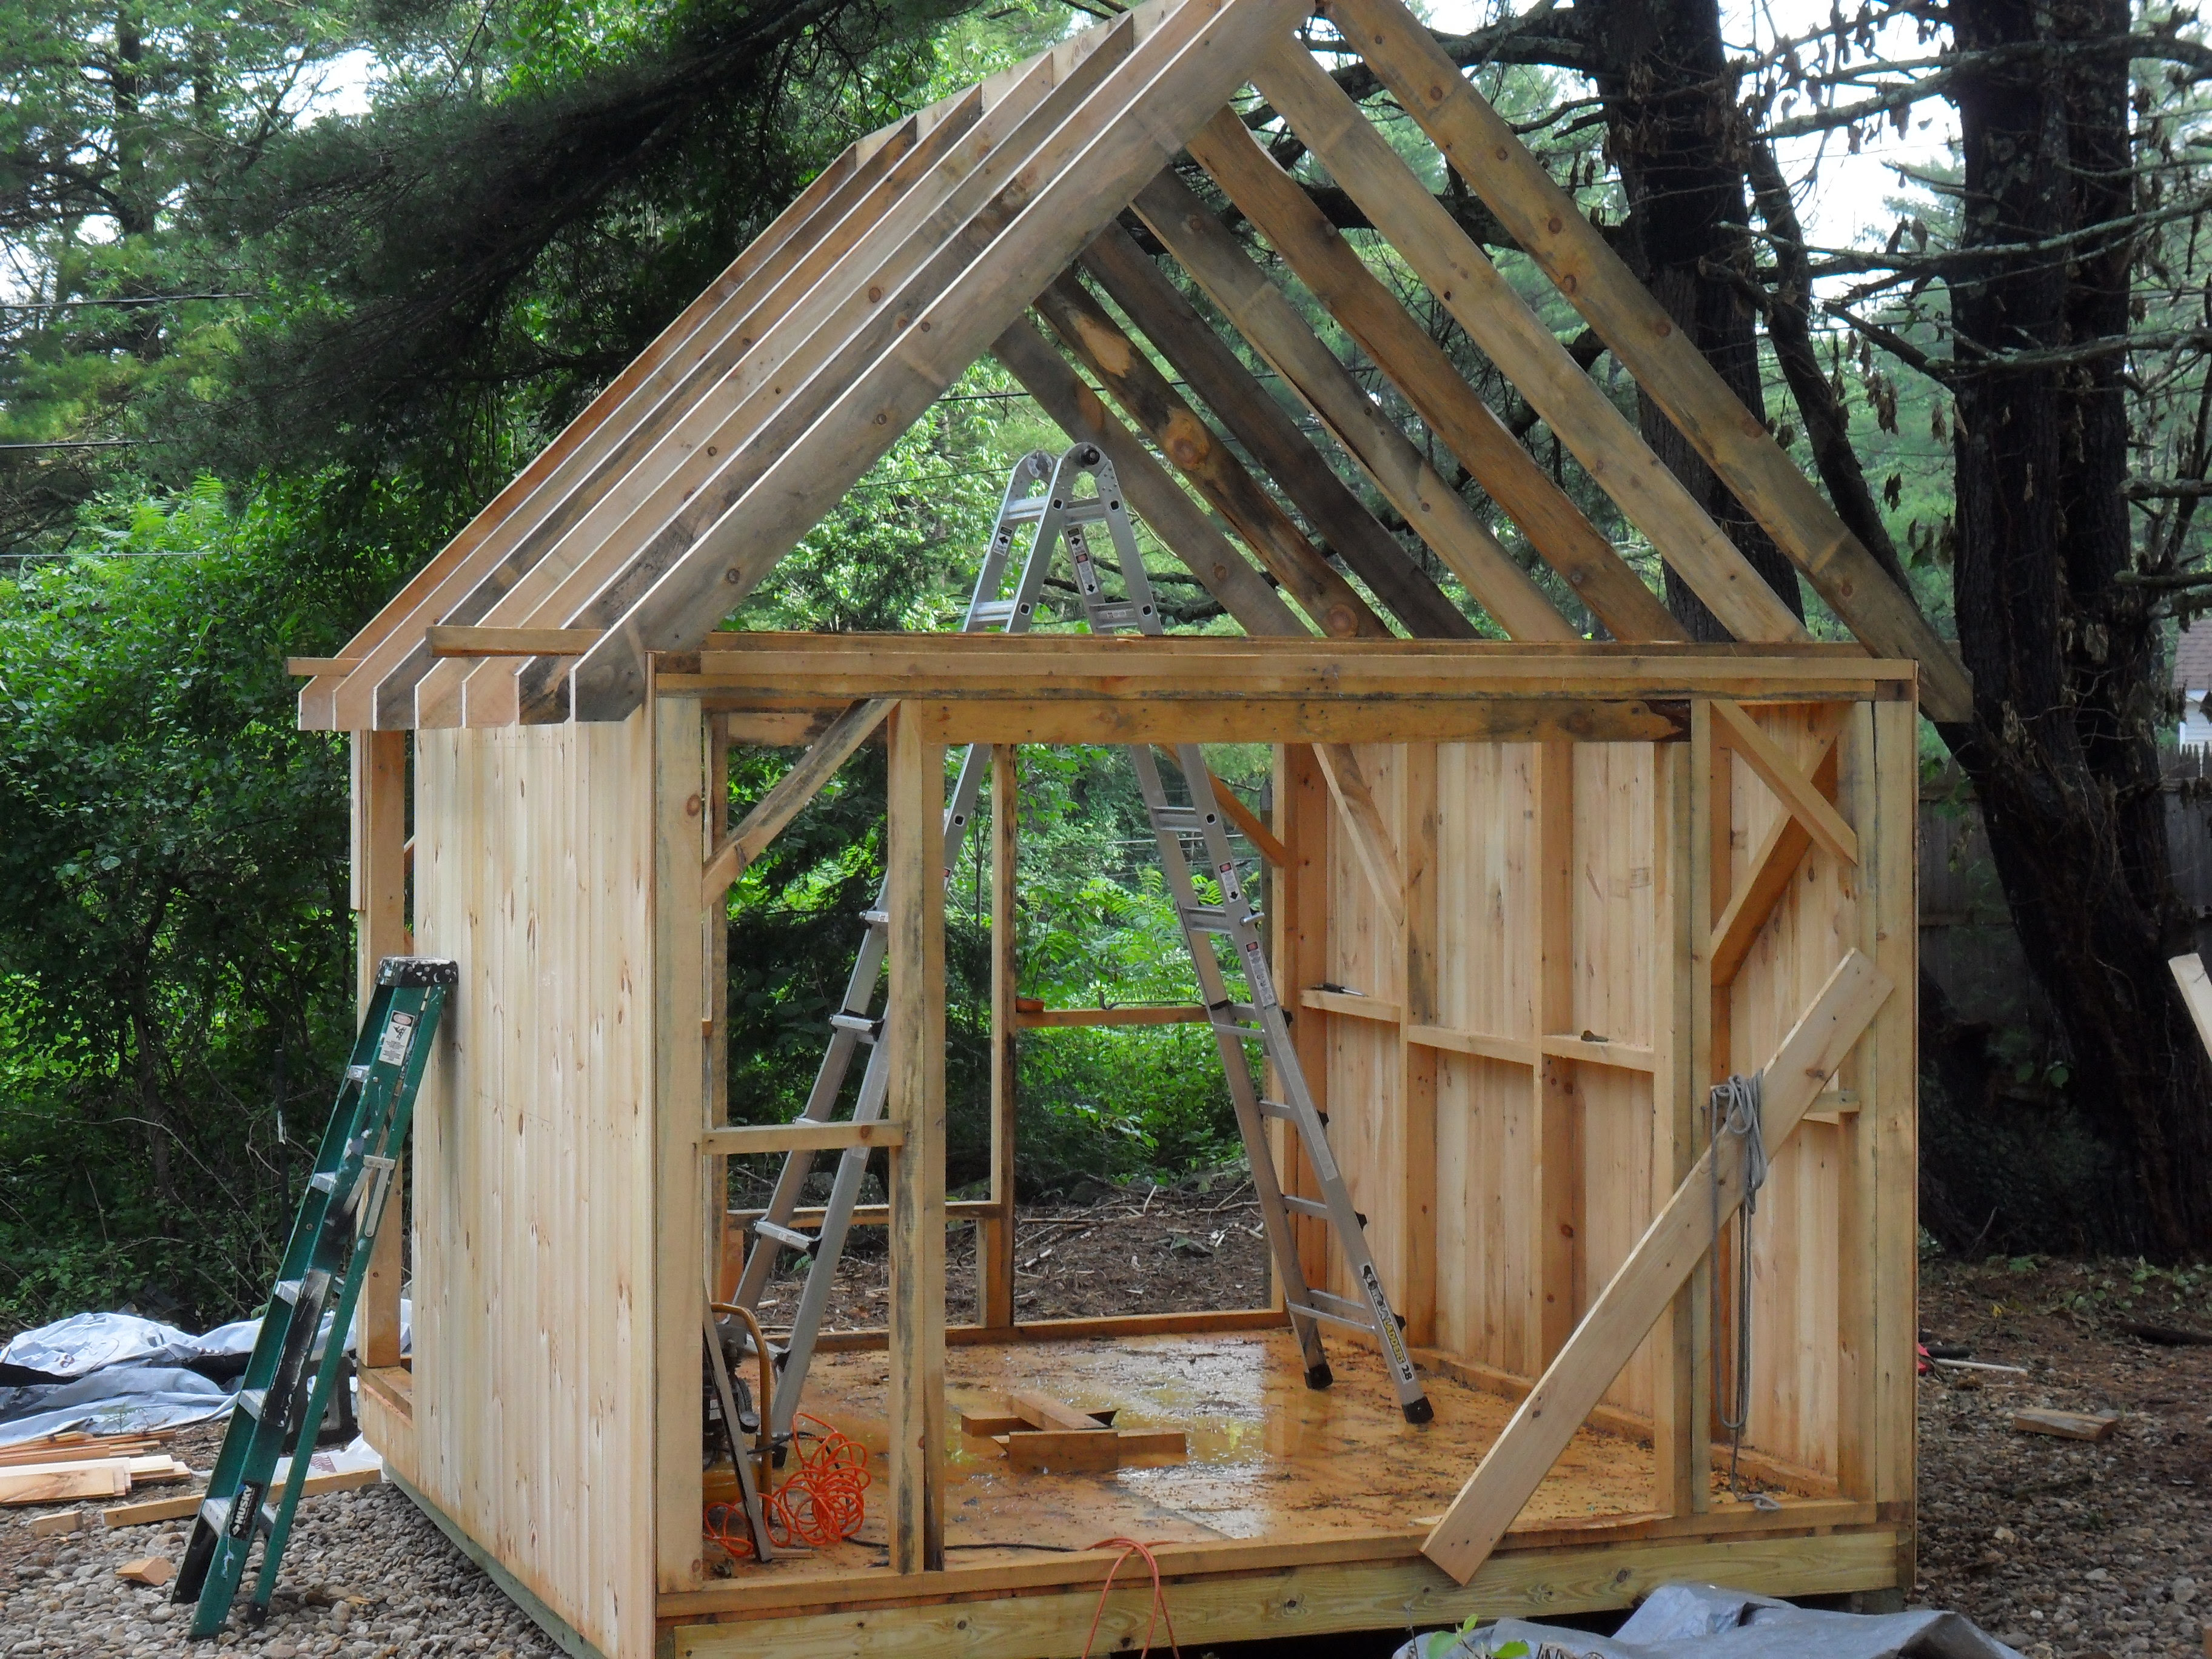 Common roof pitch for sheds | Rentony